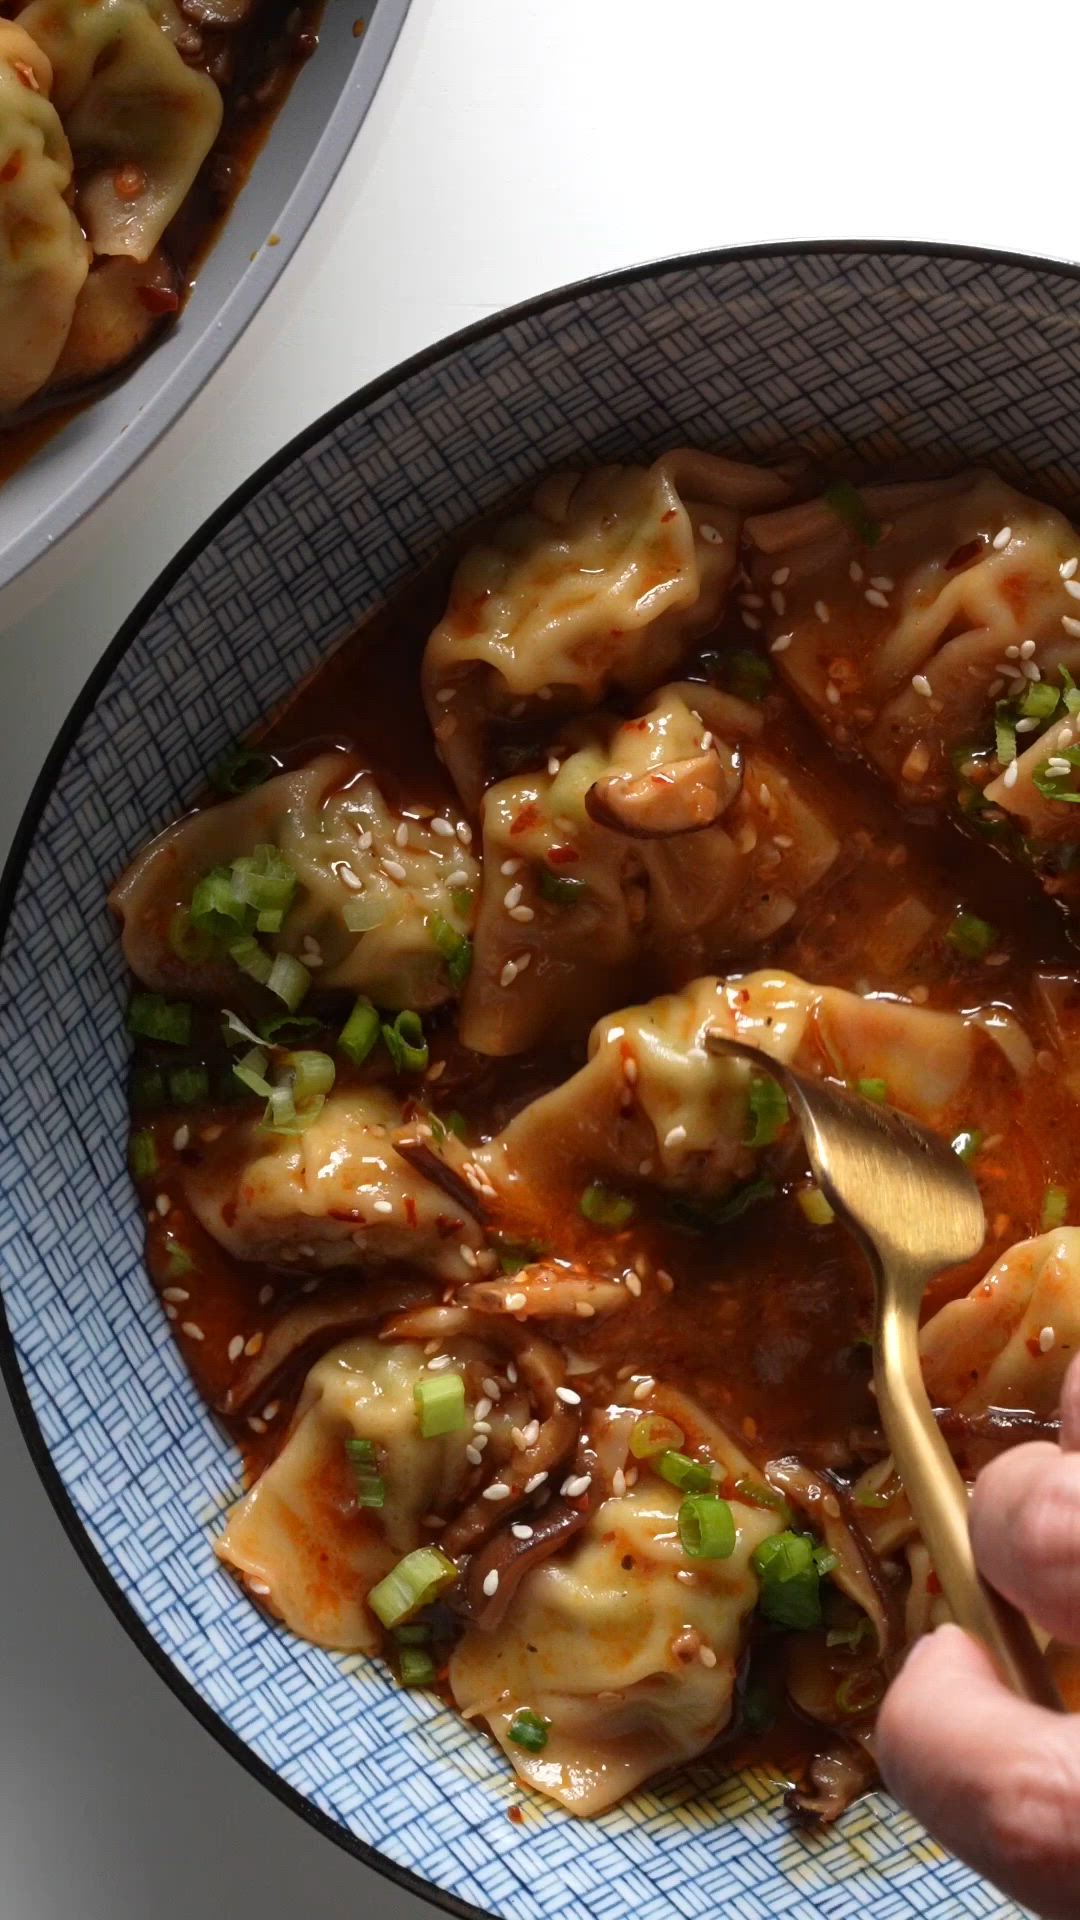 This contains: Making a chili sauce in a pan with mushrooms, and then adding chicken wontons to simmer. The wontons are added to a bowl and topped with sliced green onions,